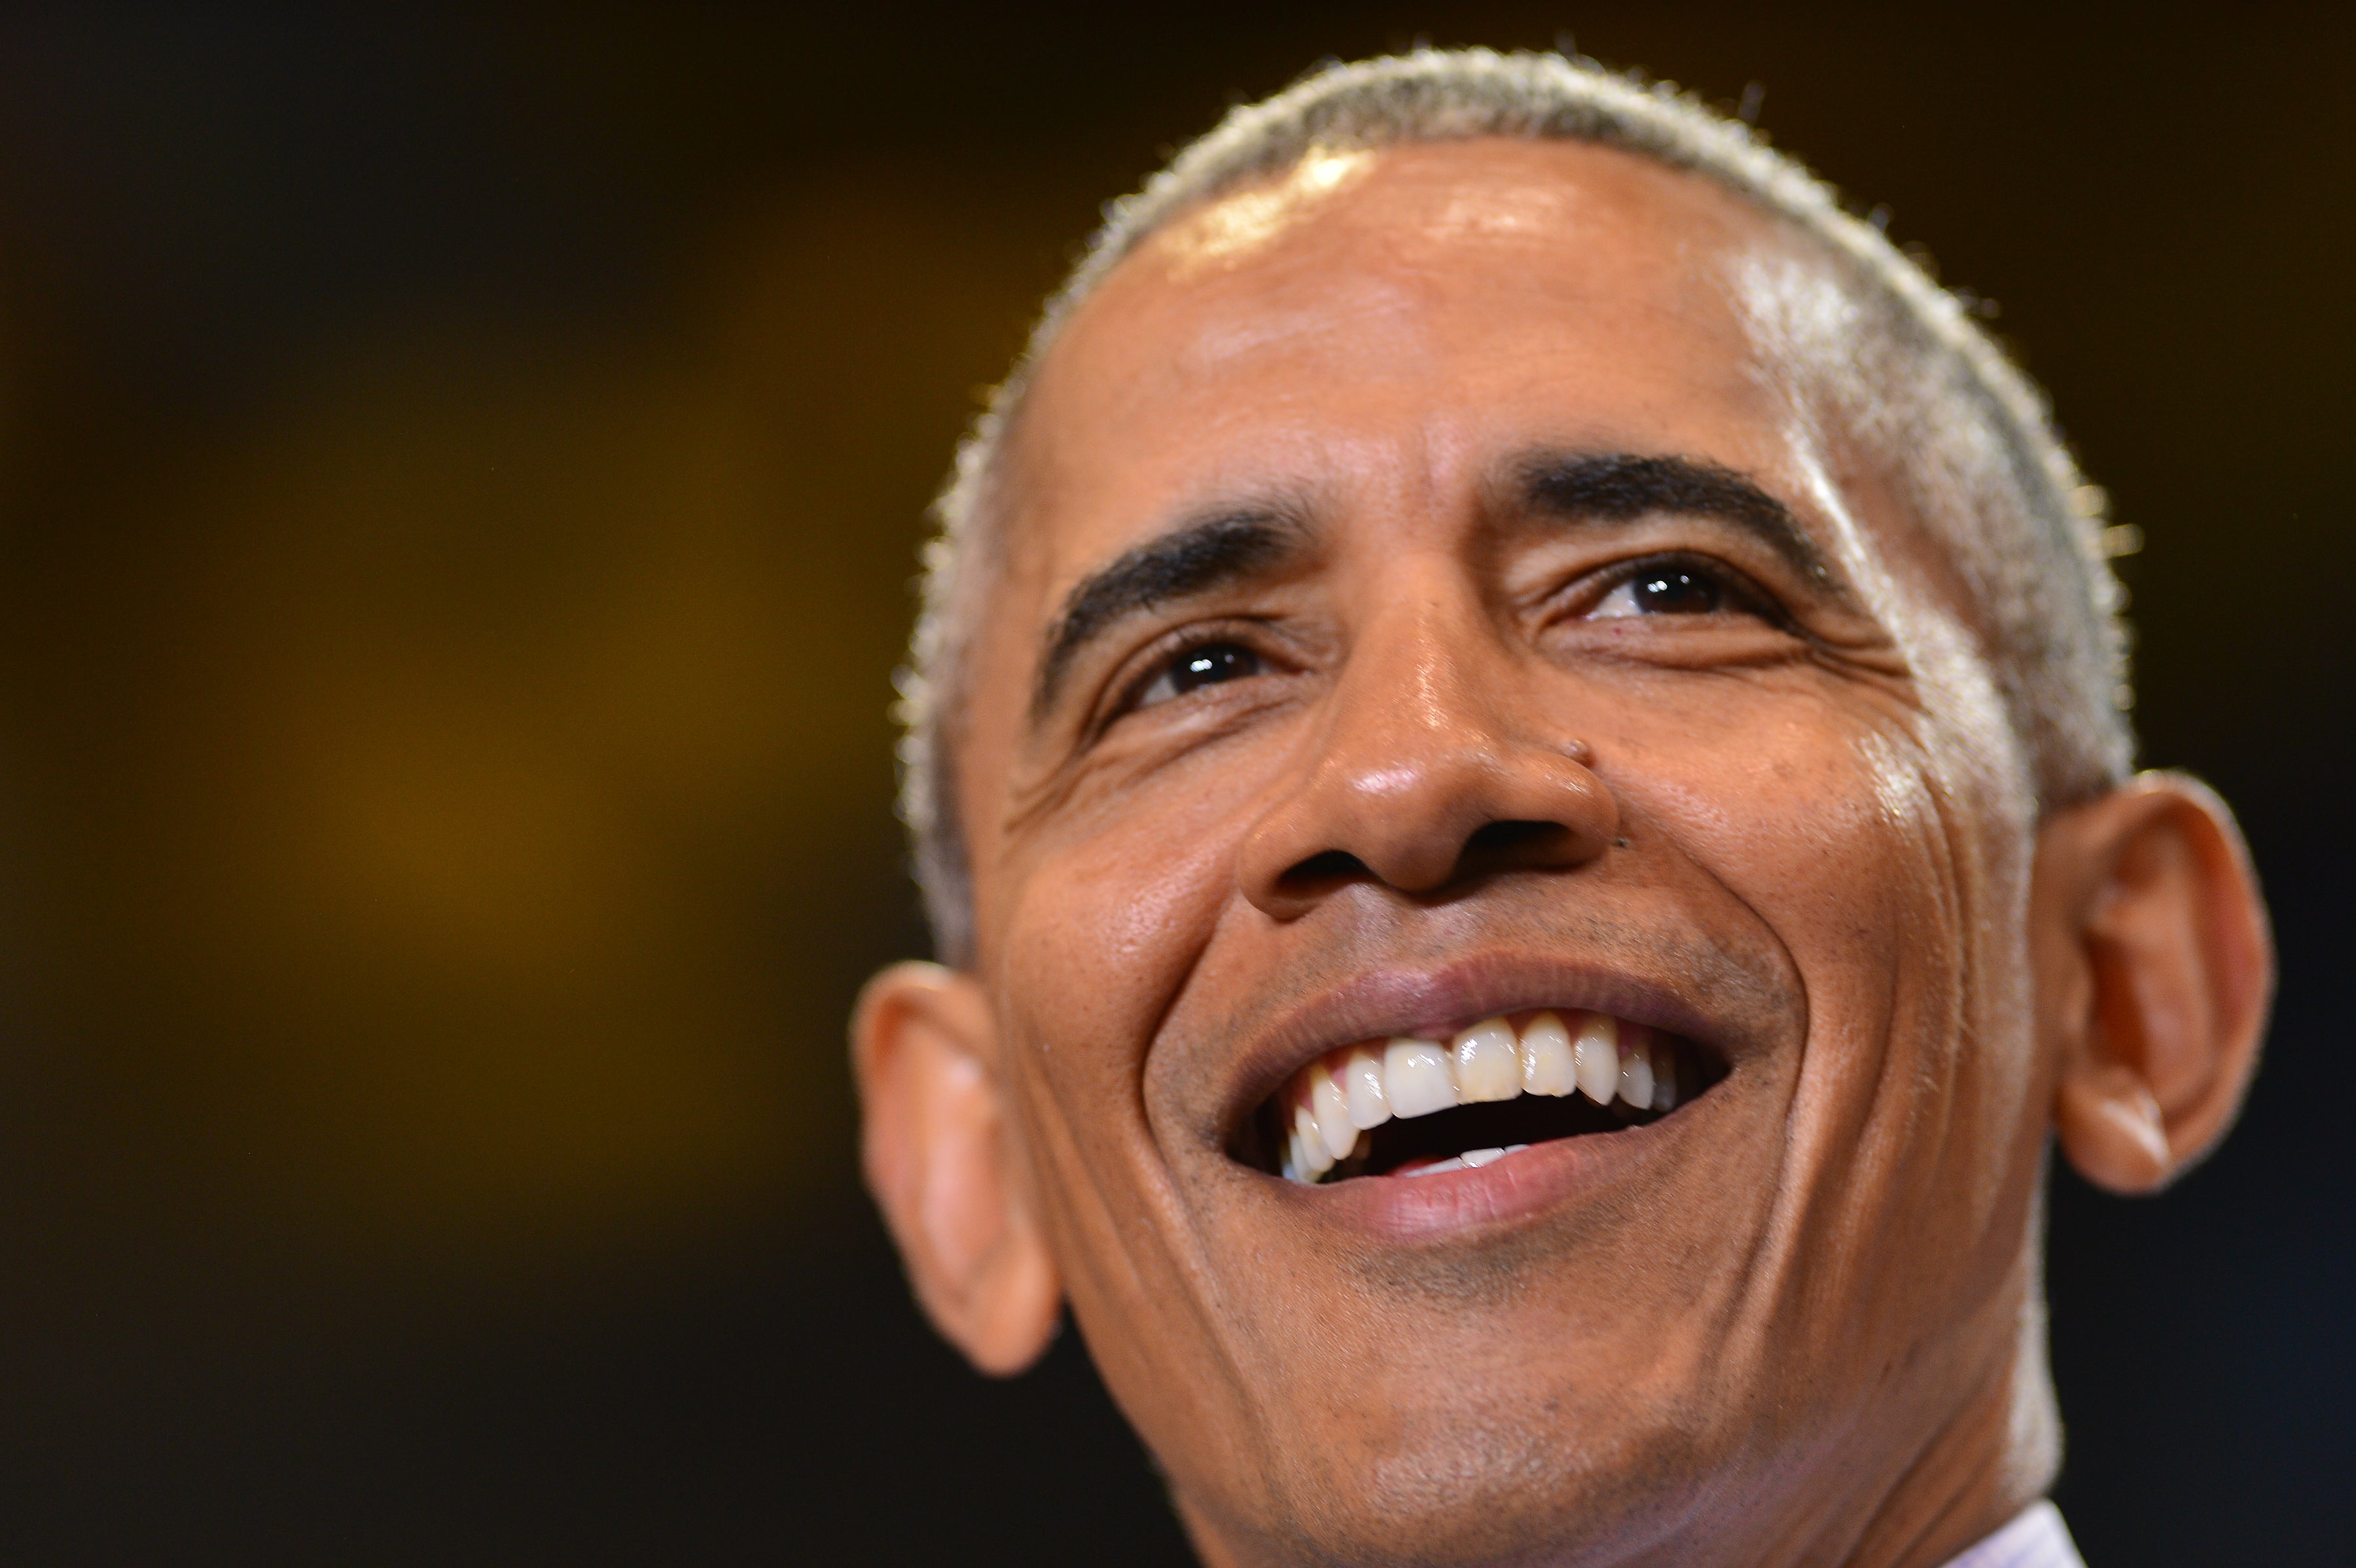 President Obama: “If I Watched Fox News, I Probably Wouldn't Vote For Me Either”
